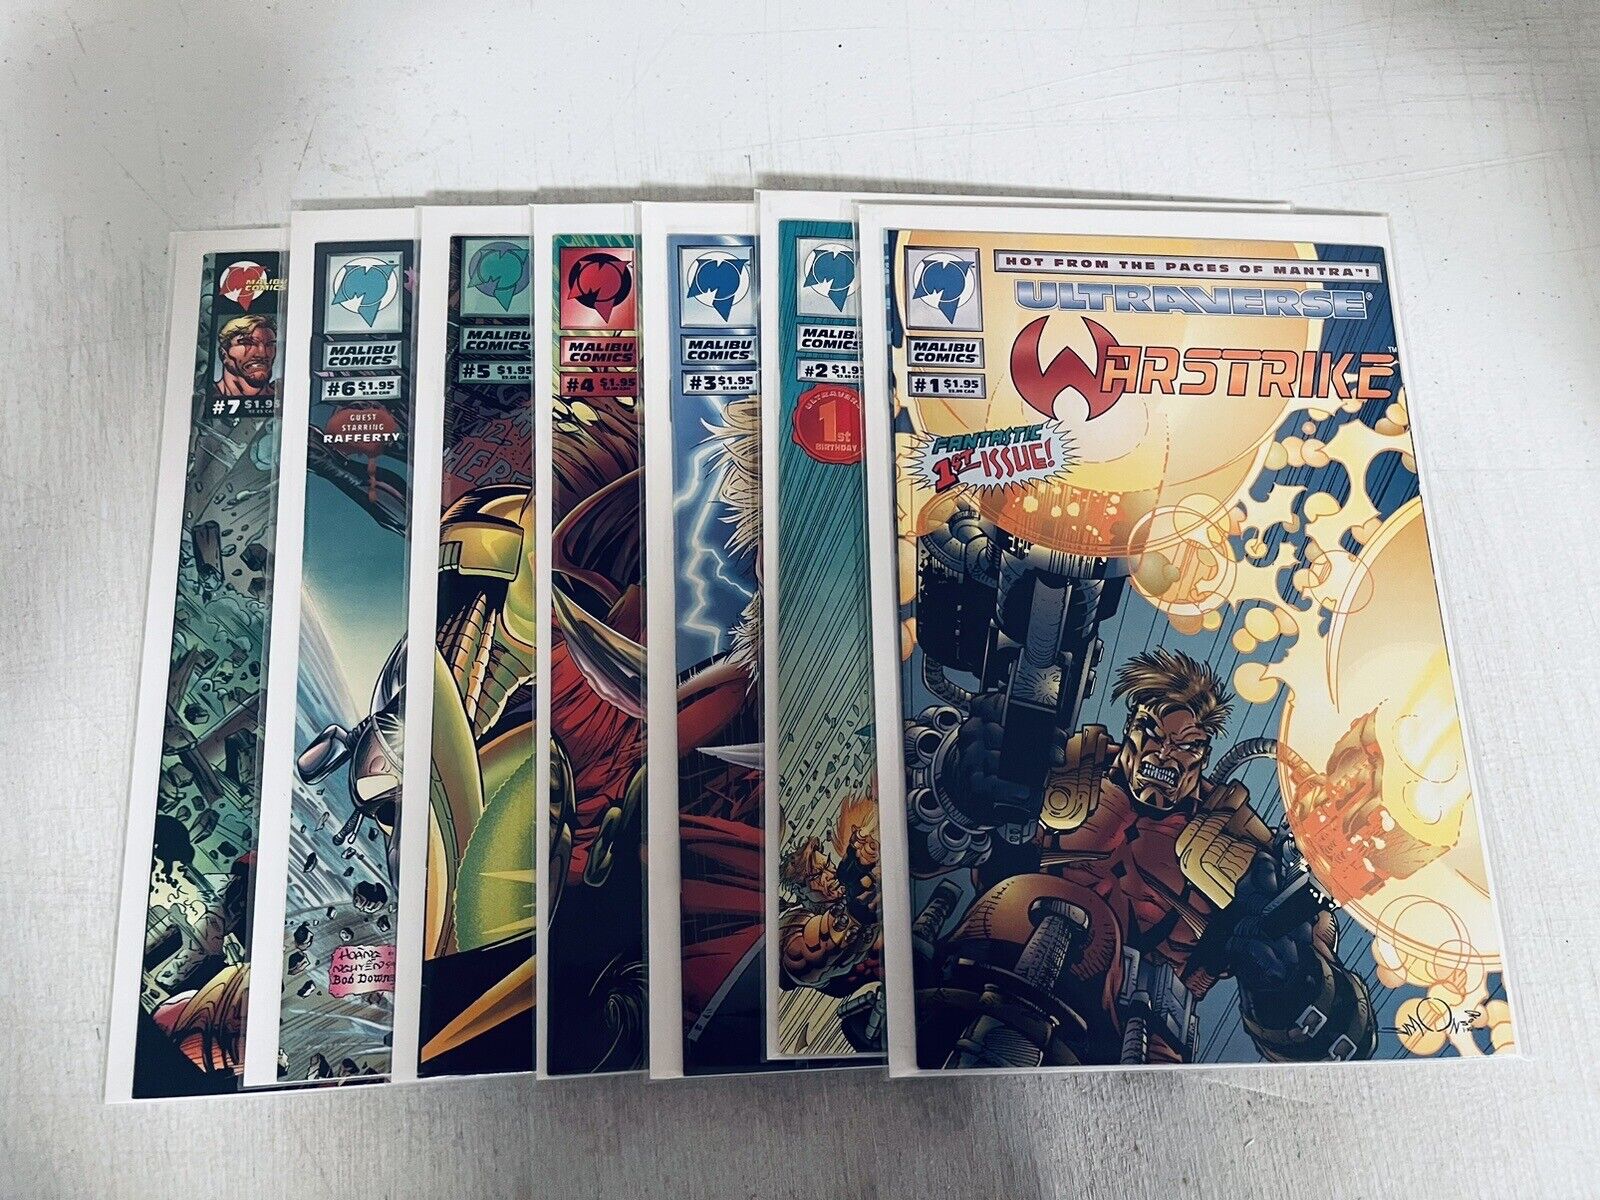 *** WOW *** ULTRAVERSE WARSTRIKE #1-7 COMPLETE SET *** EXCELLENT CONDITION ***